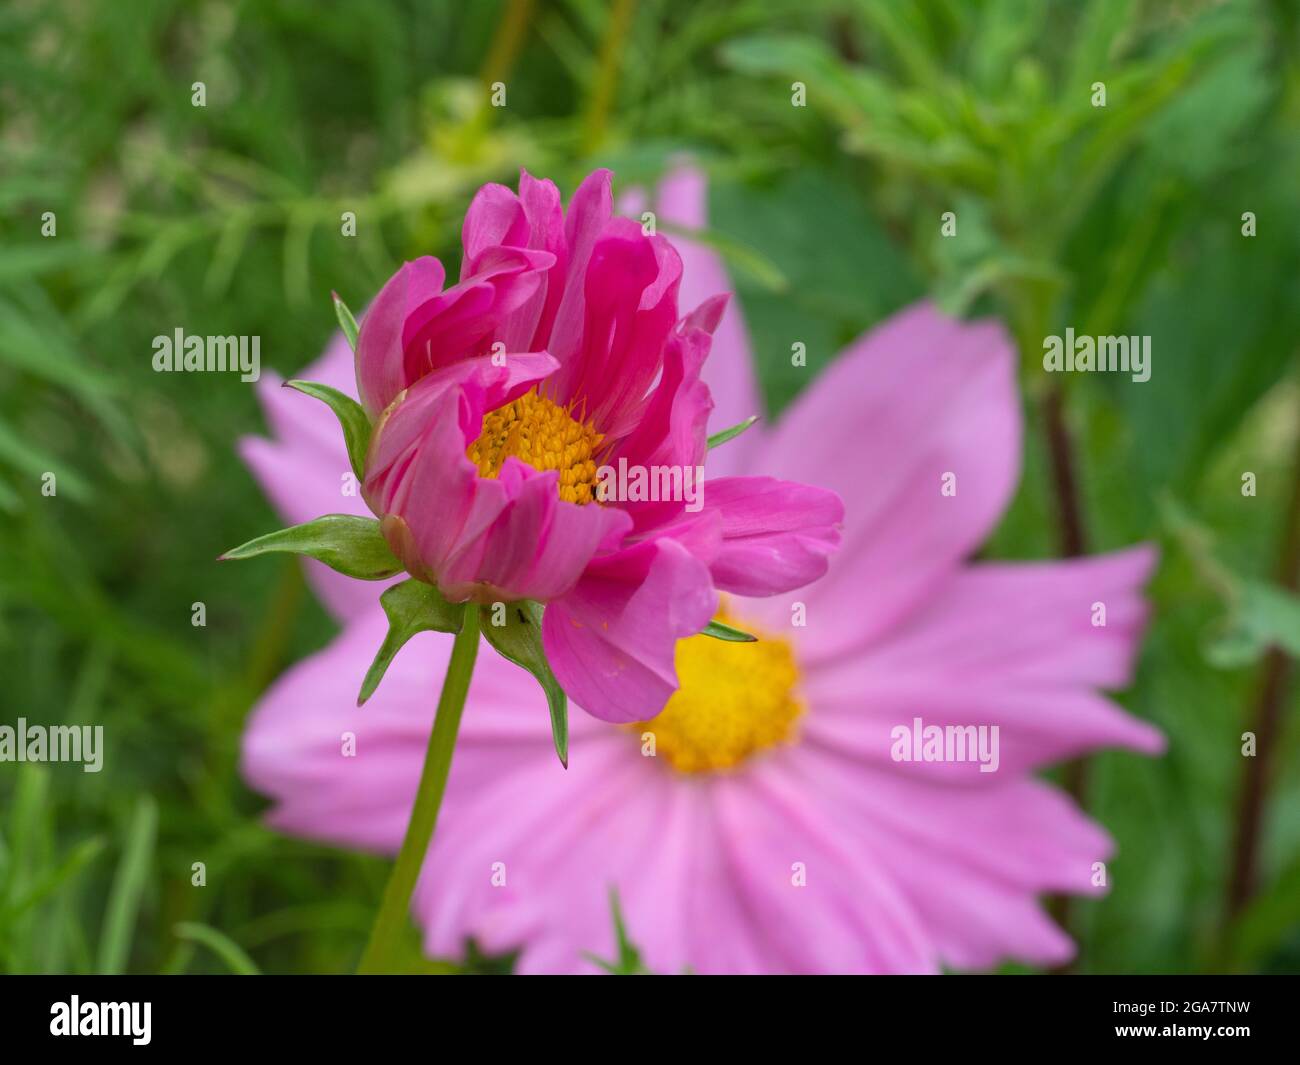 Cosmos flower about to open in bloom Stock Photo